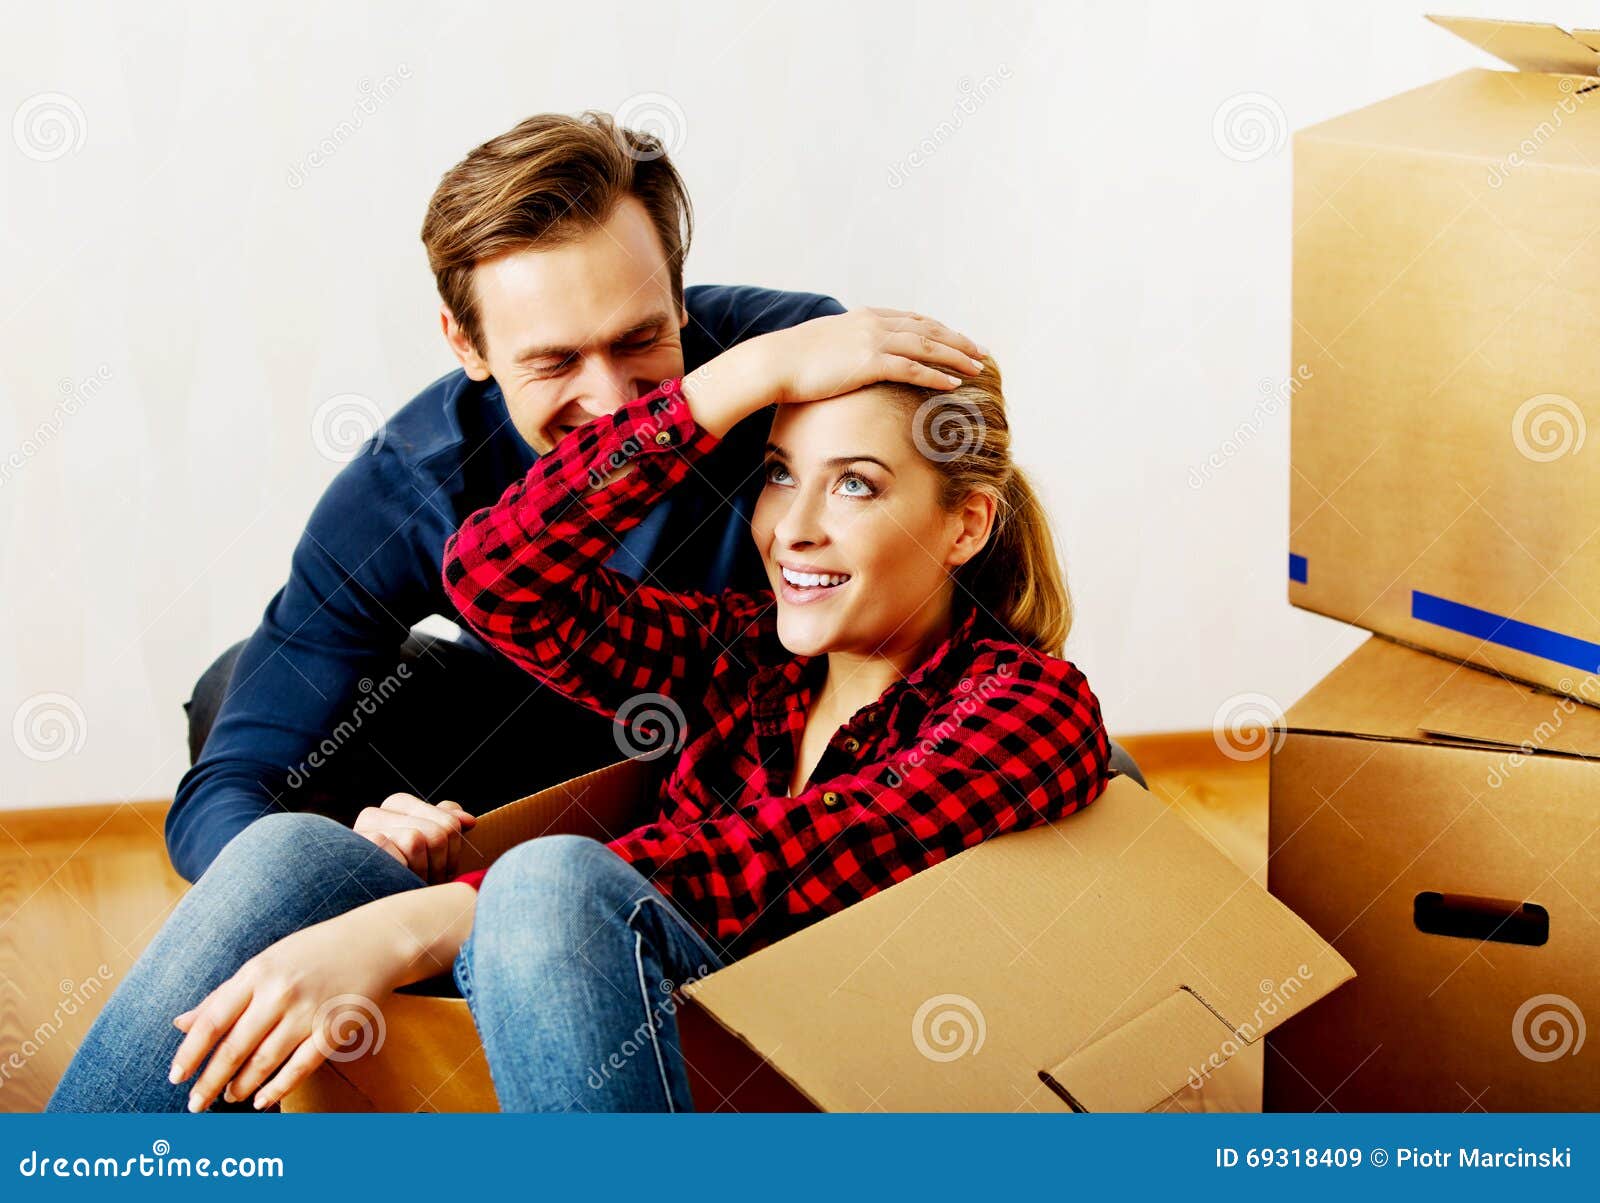 Happy Couple Having Fun In New Home Stock Image Image Of Playing